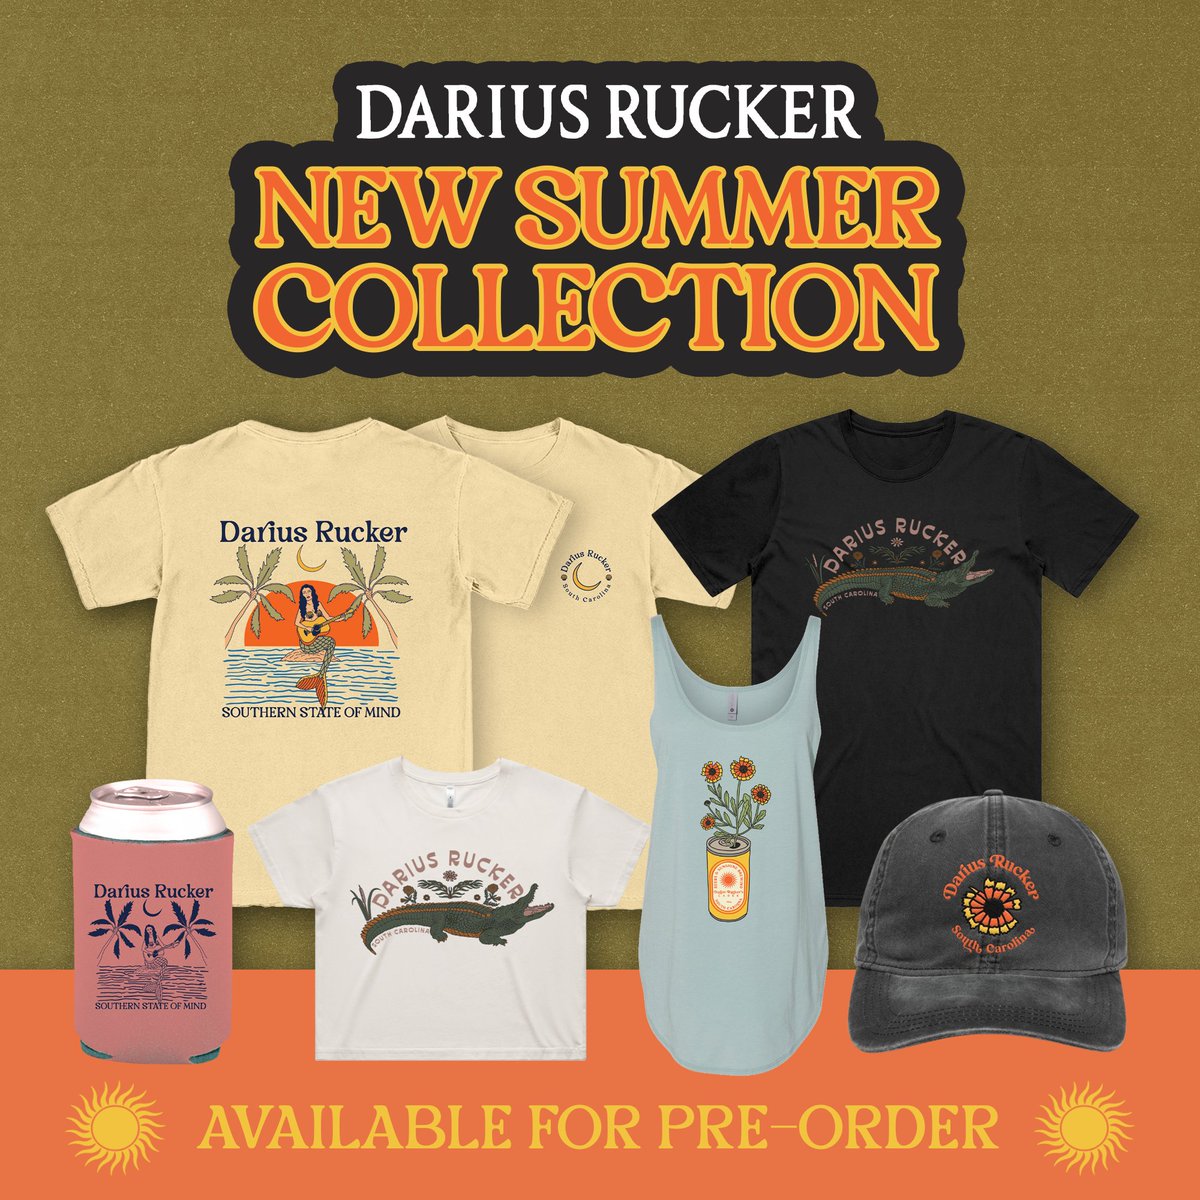 Who's ready for some Beers and Sunshine? Shop my new summer collection - dariusrucker.store/collections/sp…